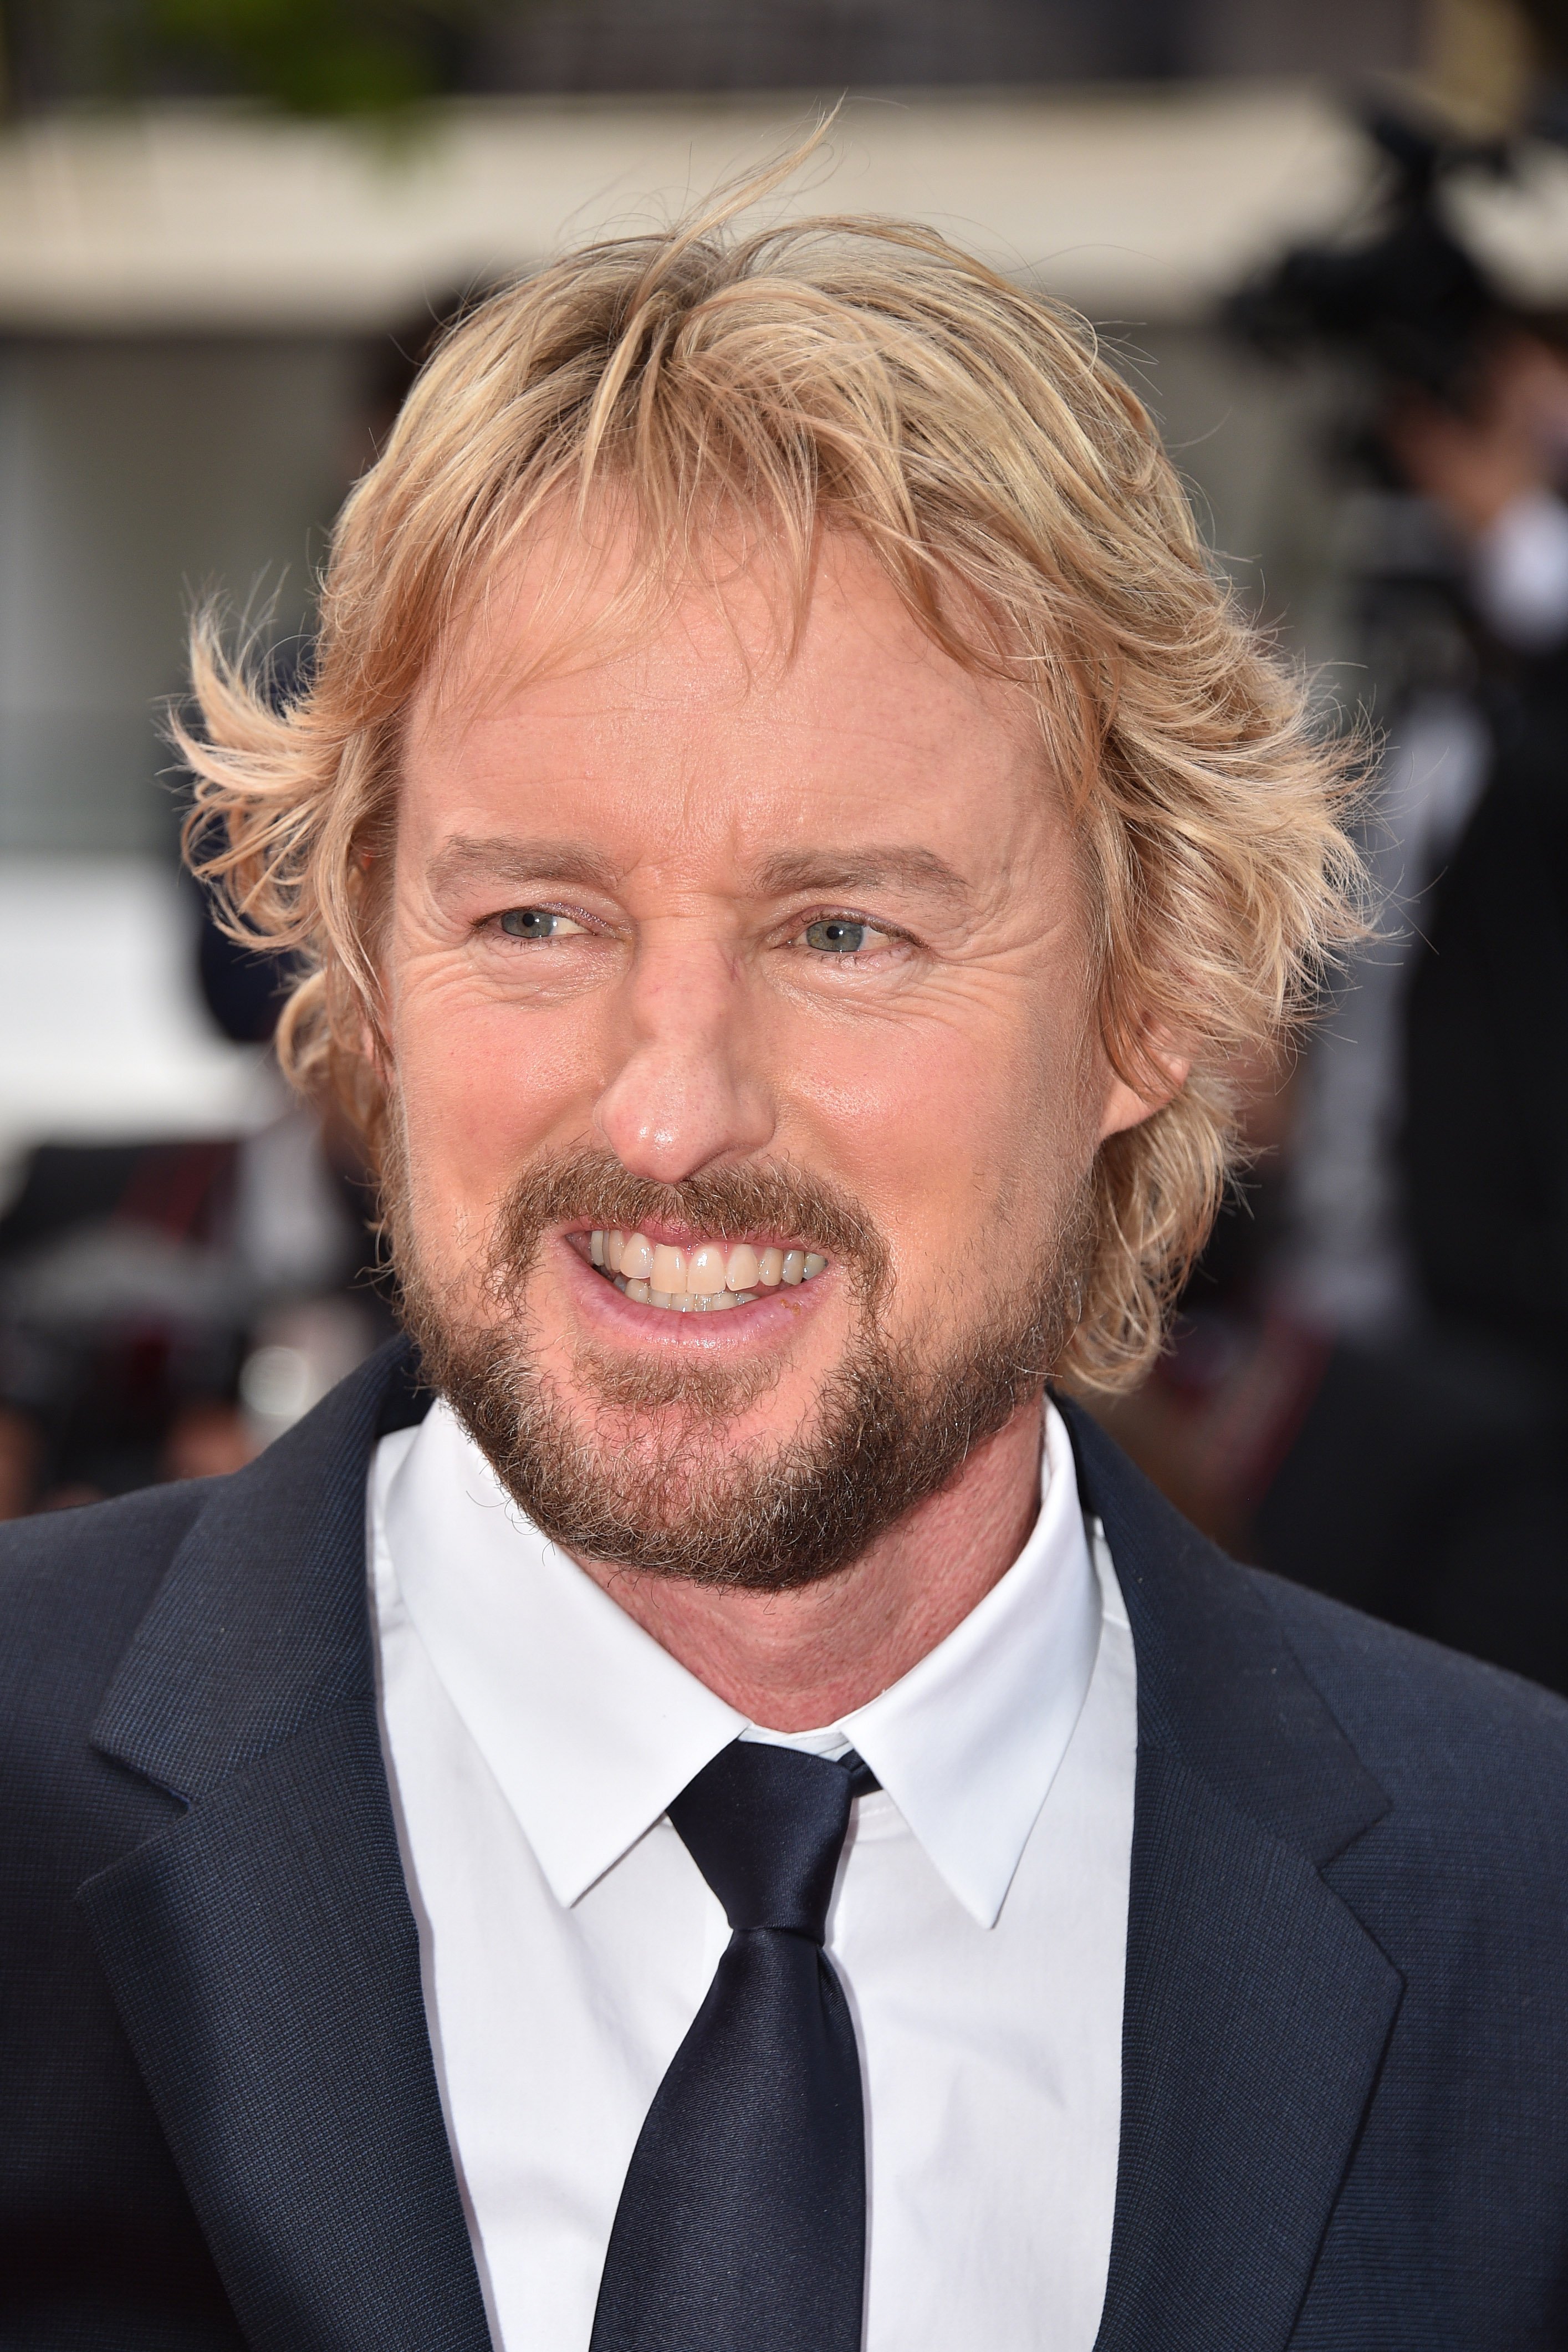  Owen Wilson attends the "The French Dispatch" screening during the 74th annual Cannes Film Festival on July 12, 2021 in Cannes, France. | Source: Getty Images